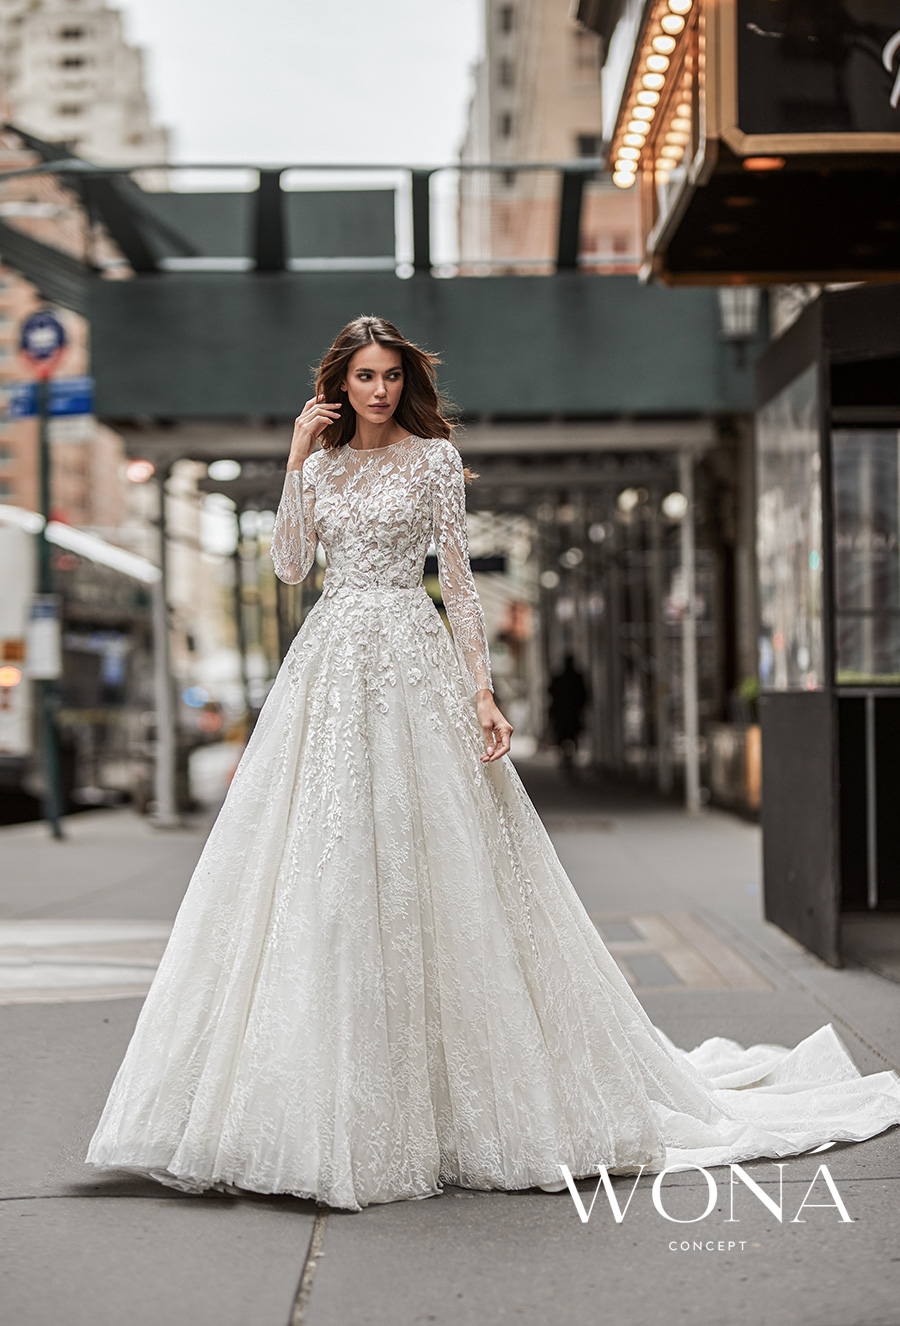 WONA Concept 2022 Wedding Dresses — “Love in the City” Bridal Collection